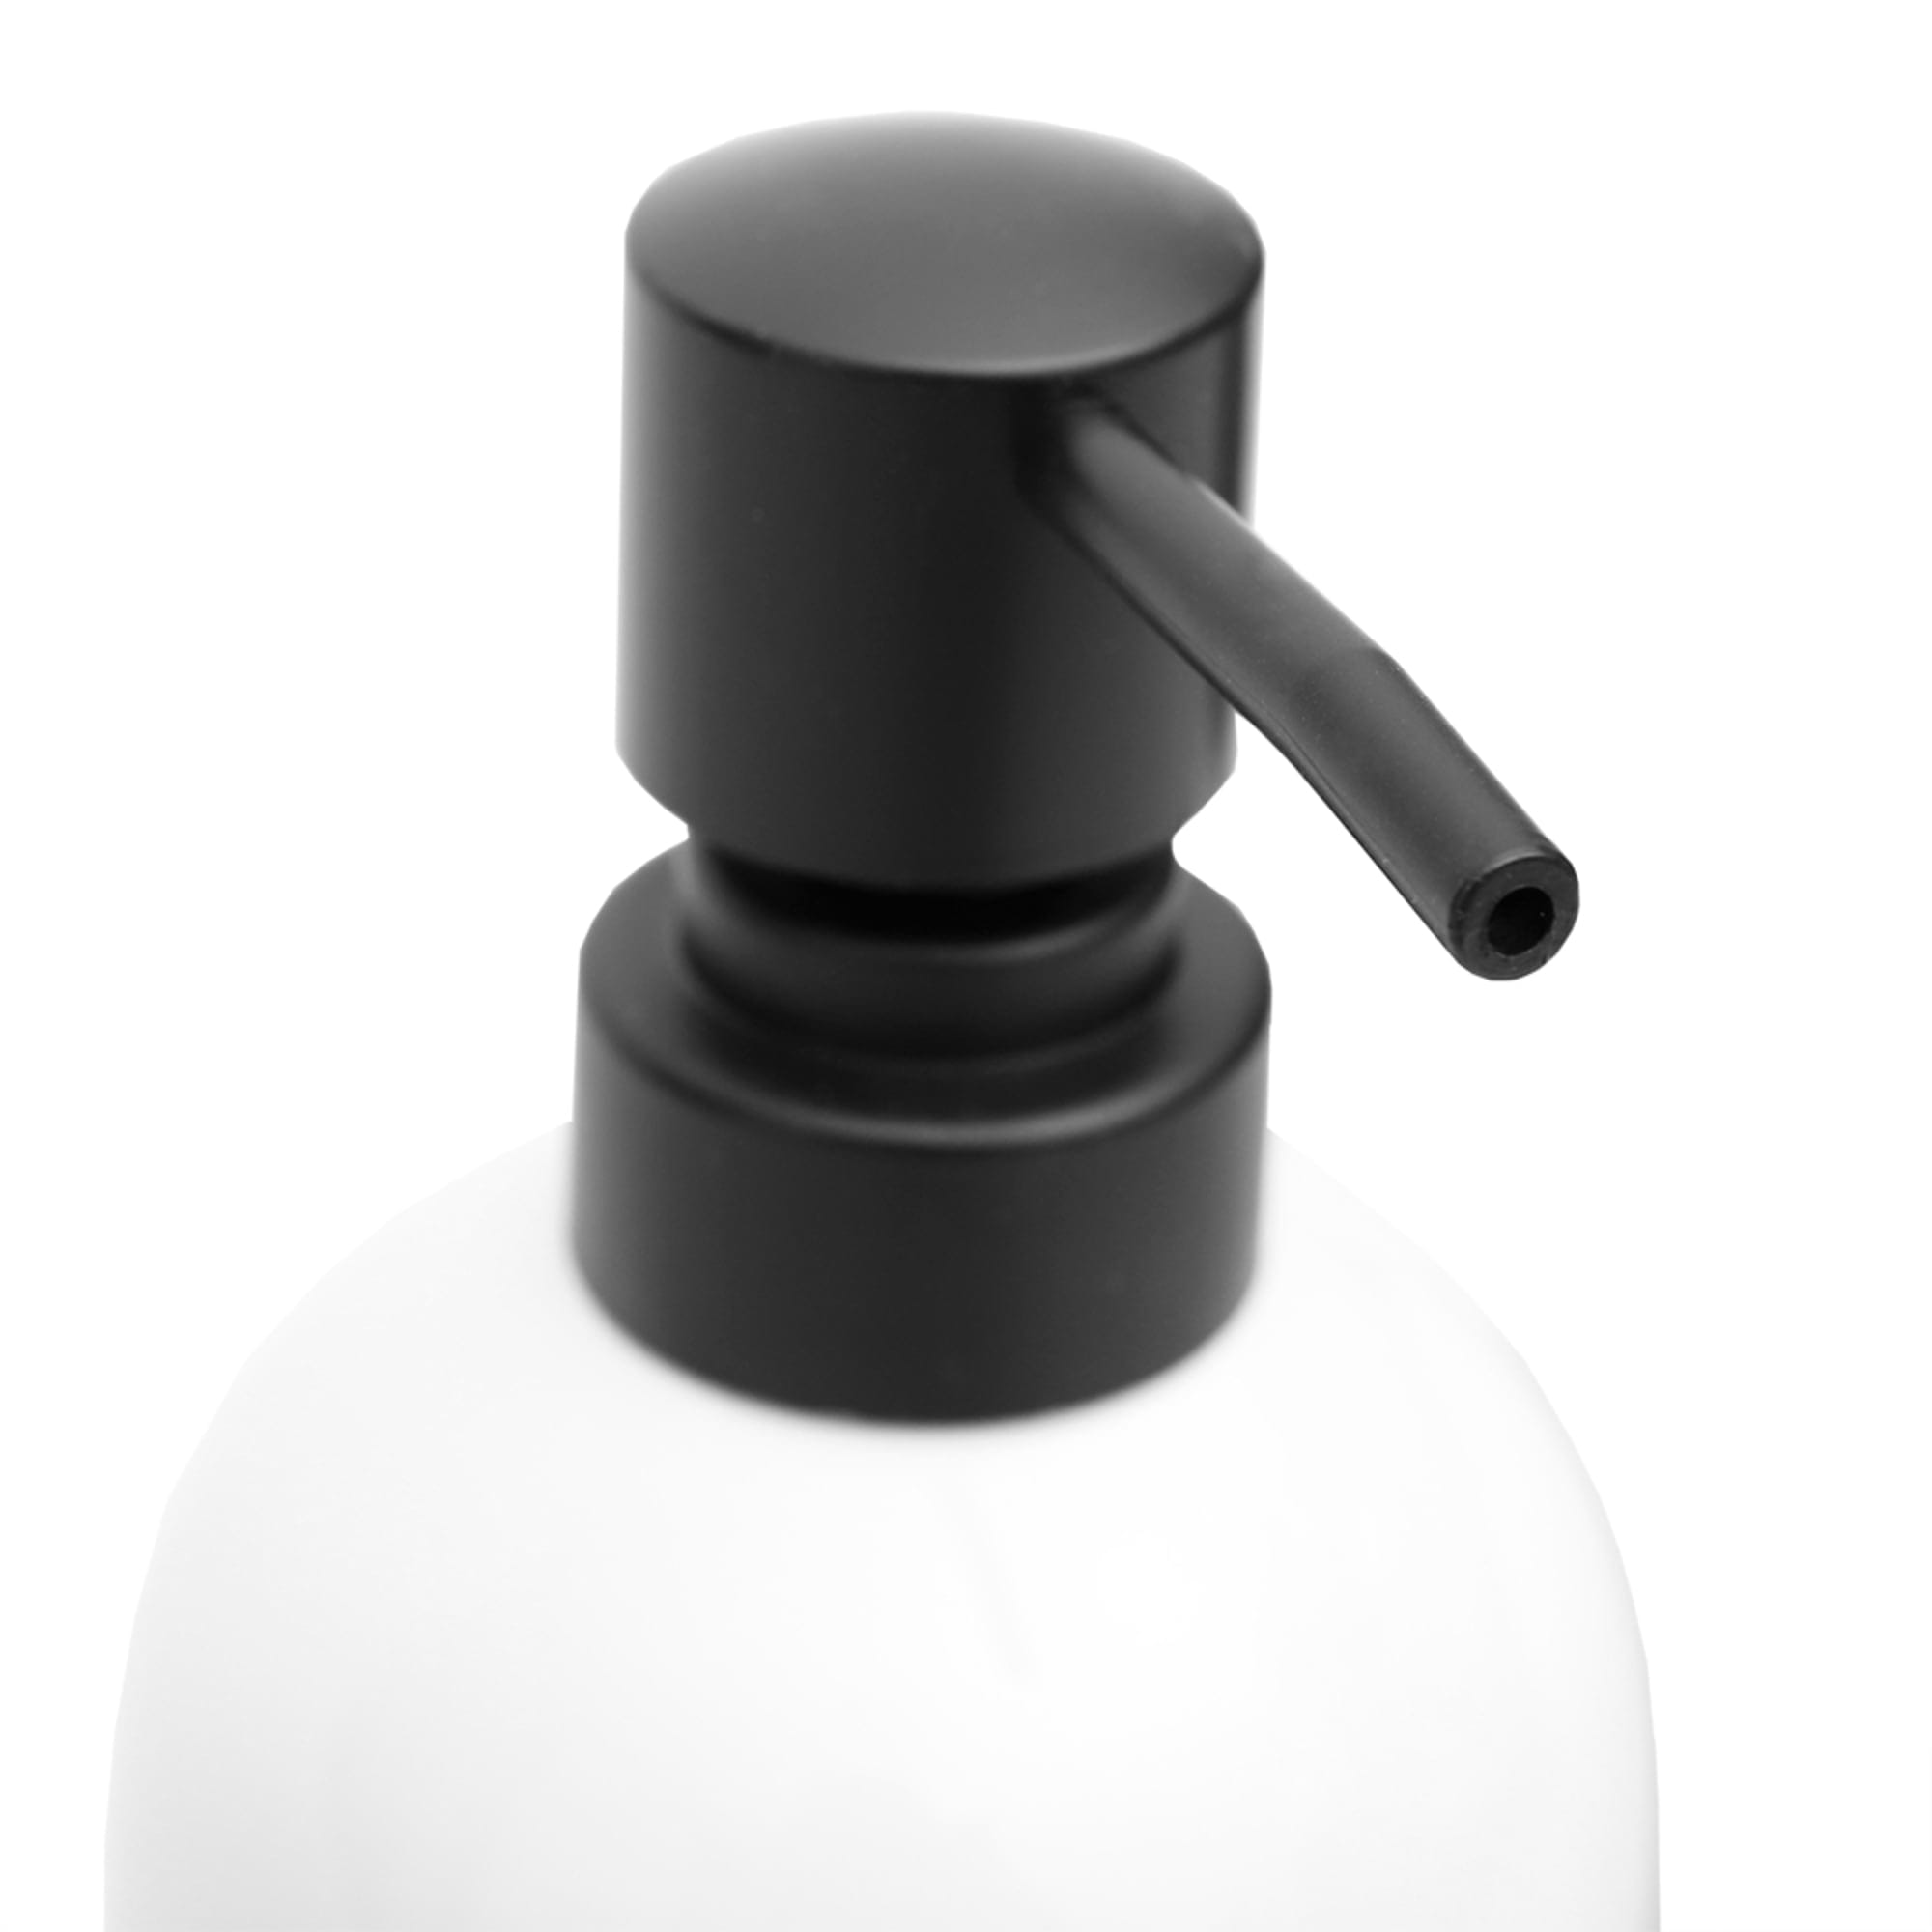 Home Basics 2 Piece Ceramic Soap Dispenser Set with Metal Caddy, White $10.00 EACH, CASE PACK OF 6